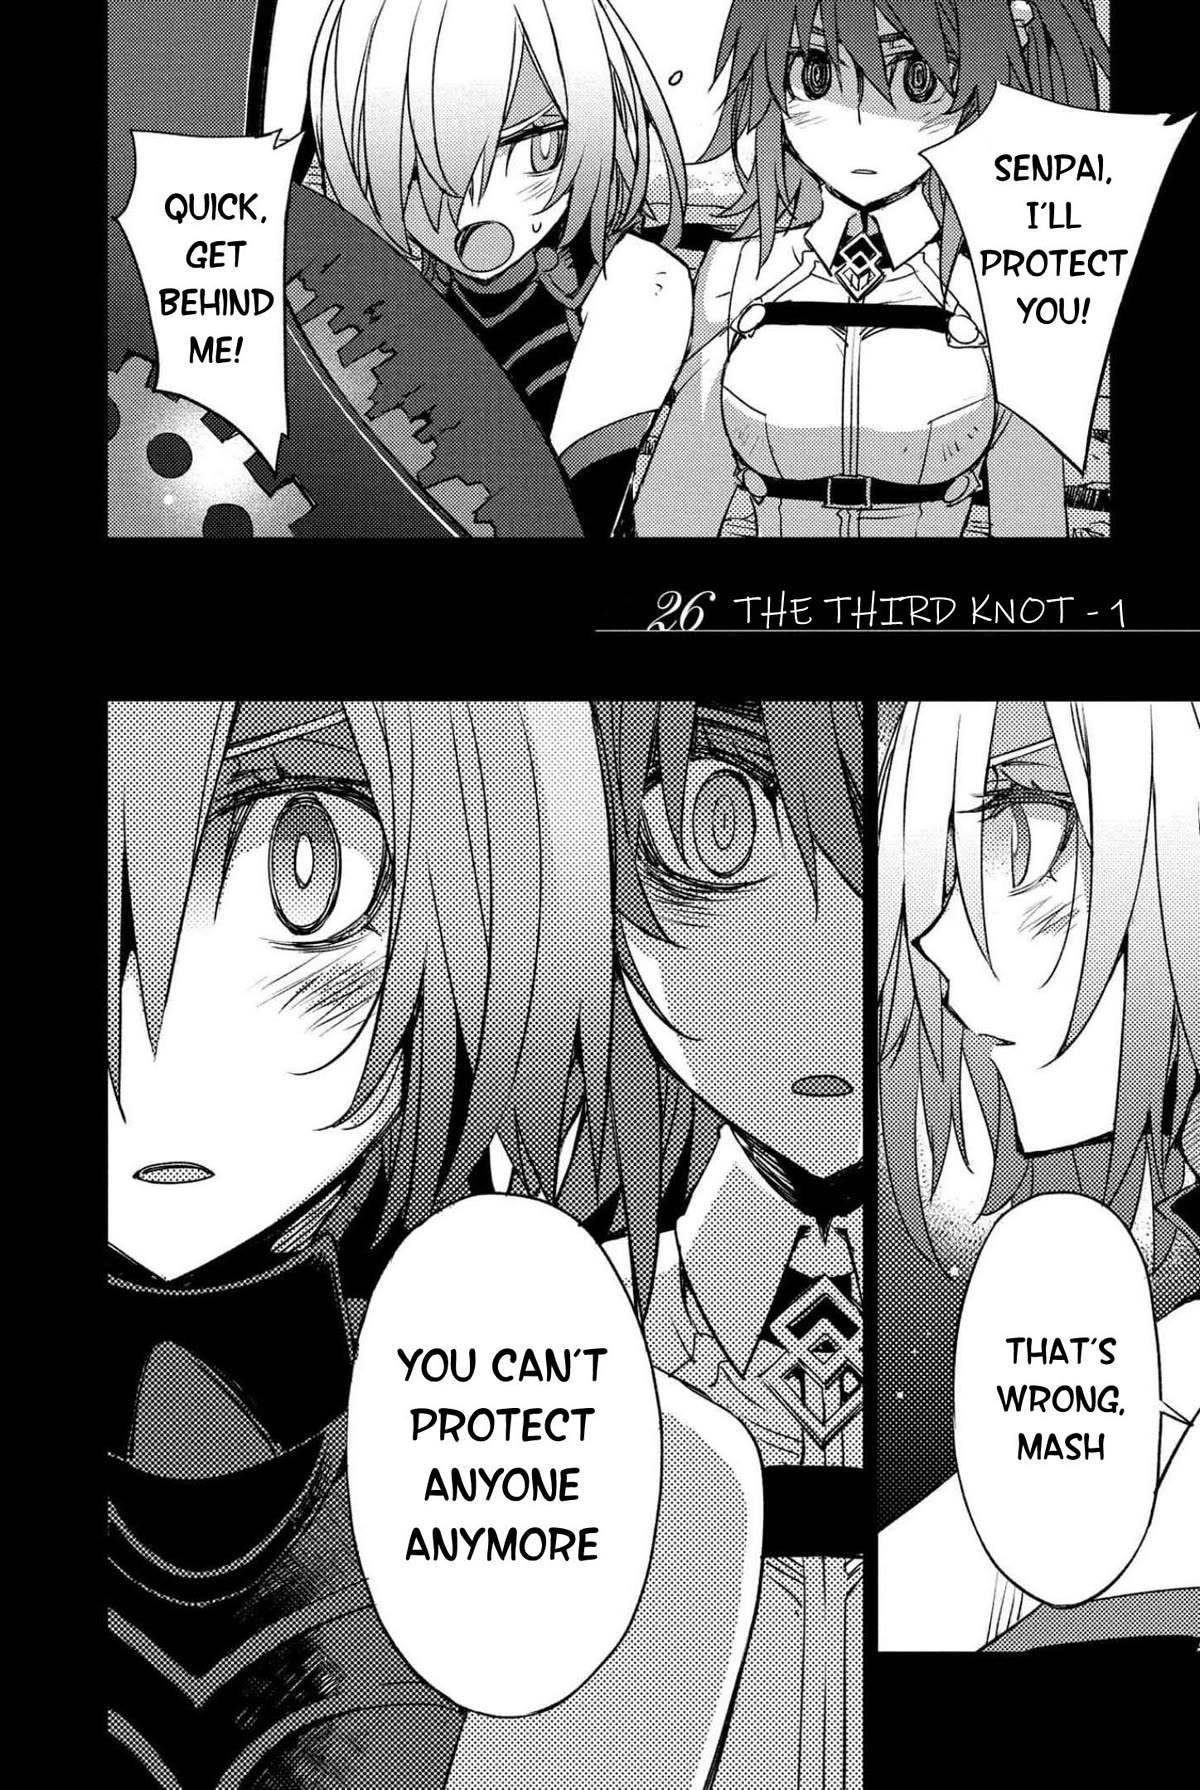 Fate/Grand Order: Epic of Remnant - Subspecies Singularity IV: Taboo Advent Salem: Salem of Heresy - chapter 26 - #2